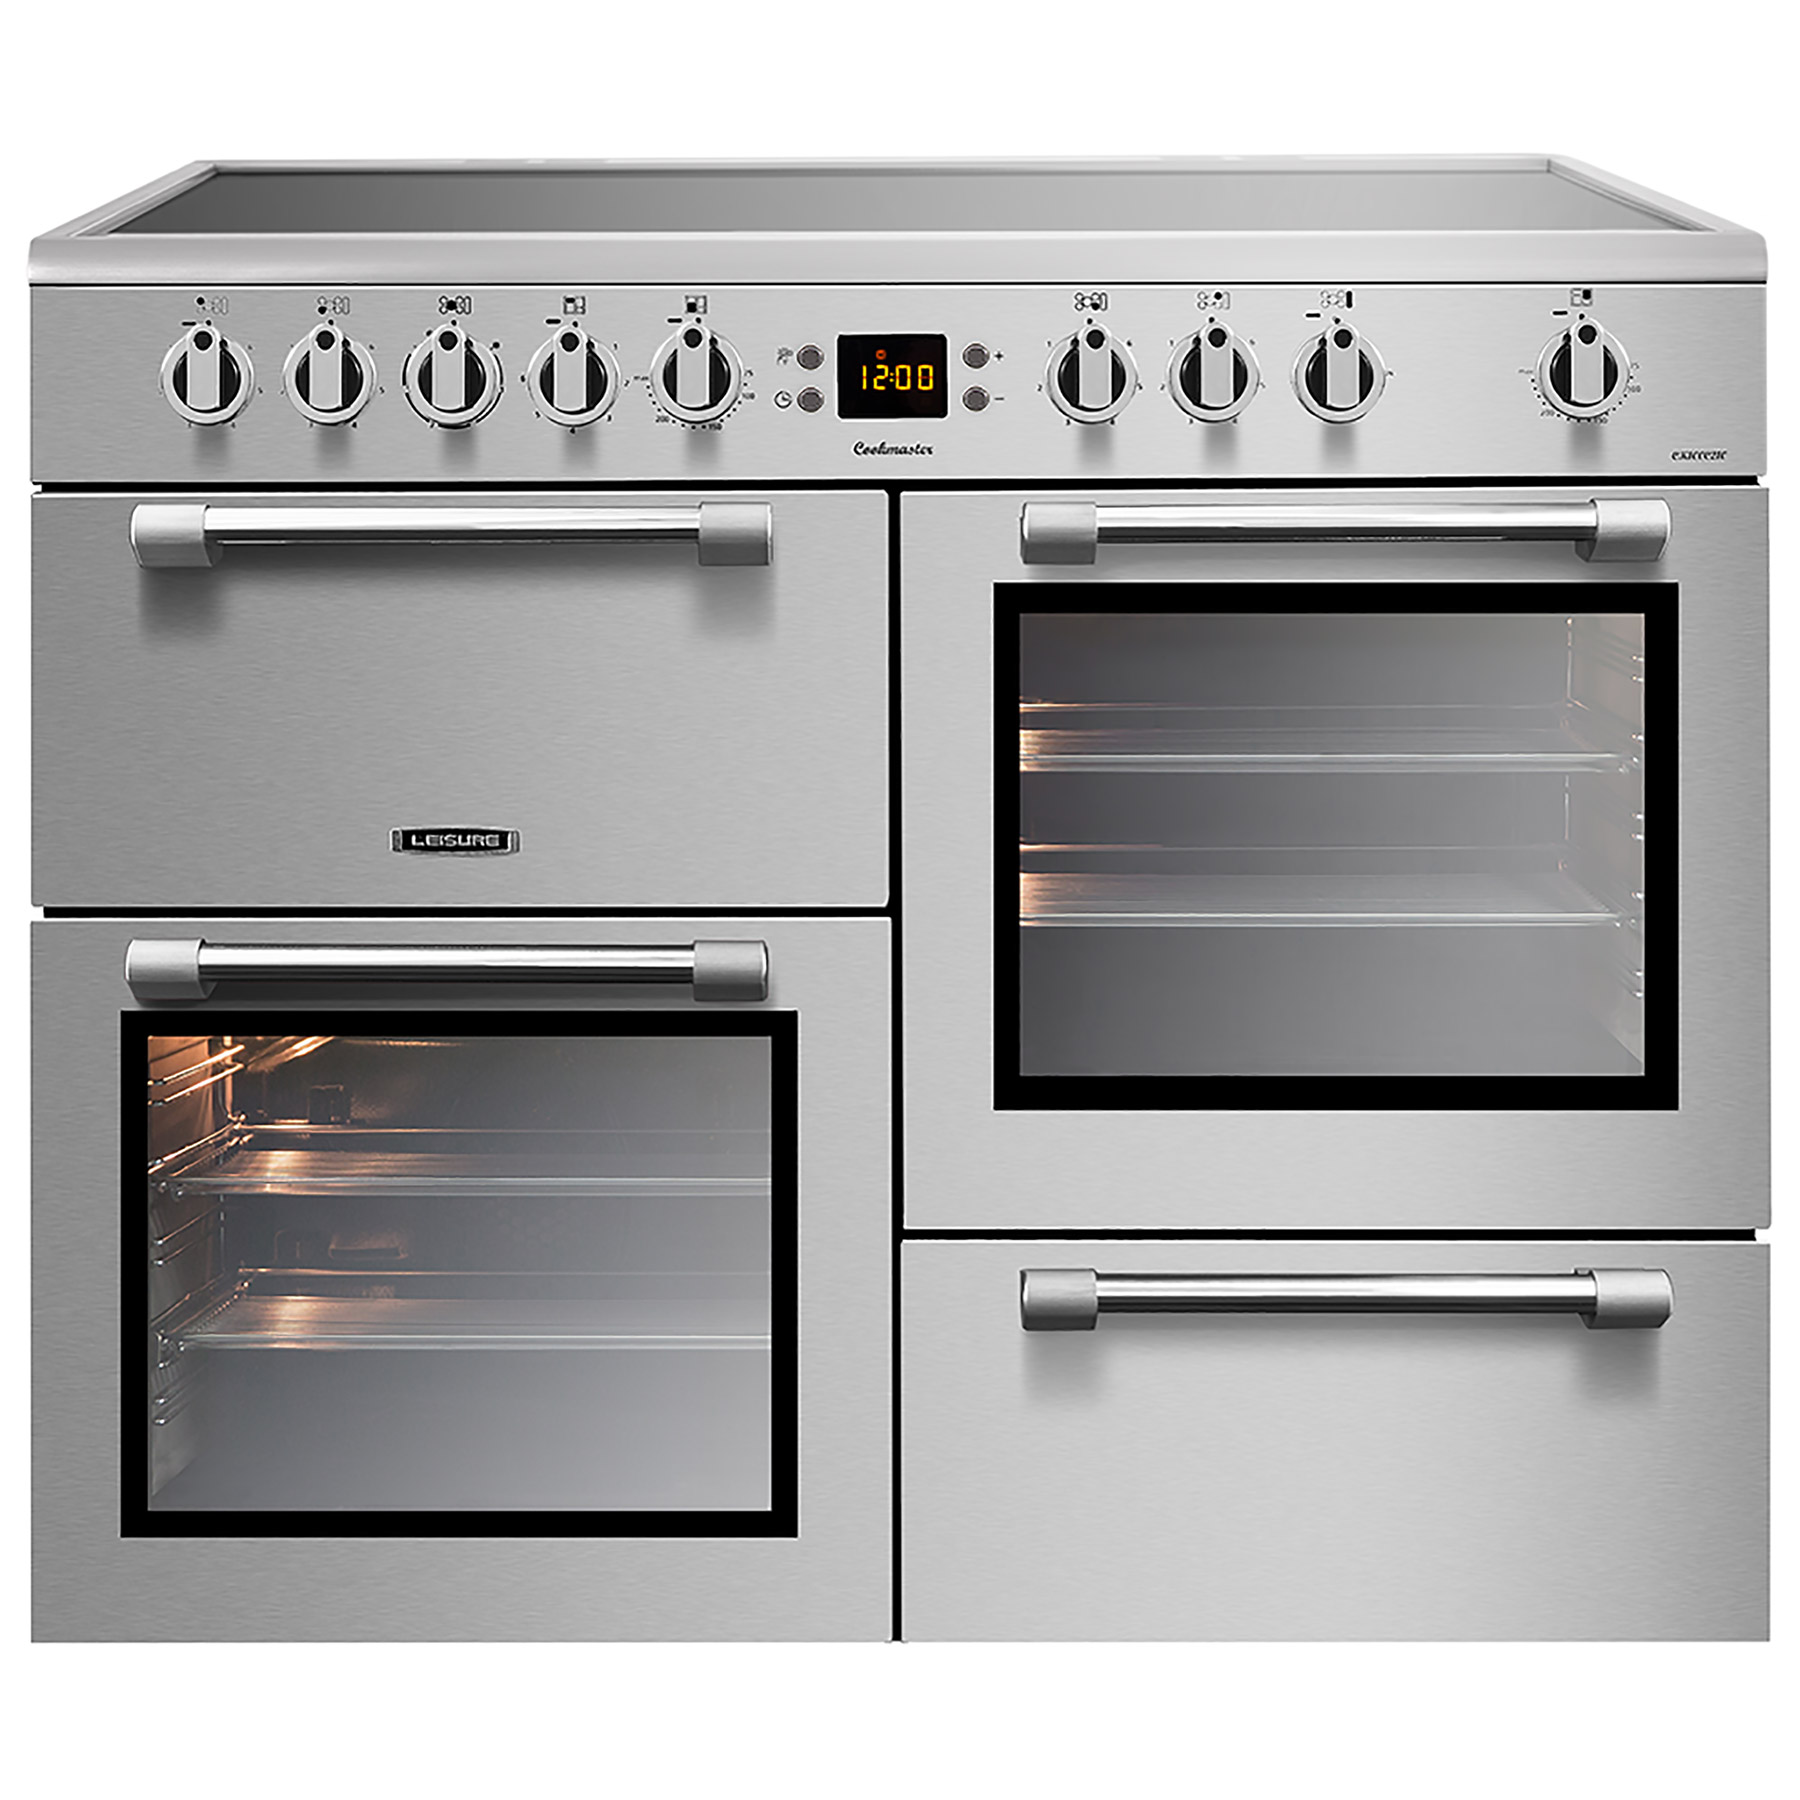 Image of Leisure CK100C210X 100cm Cookmaster Electric Range Cooker in St Steel